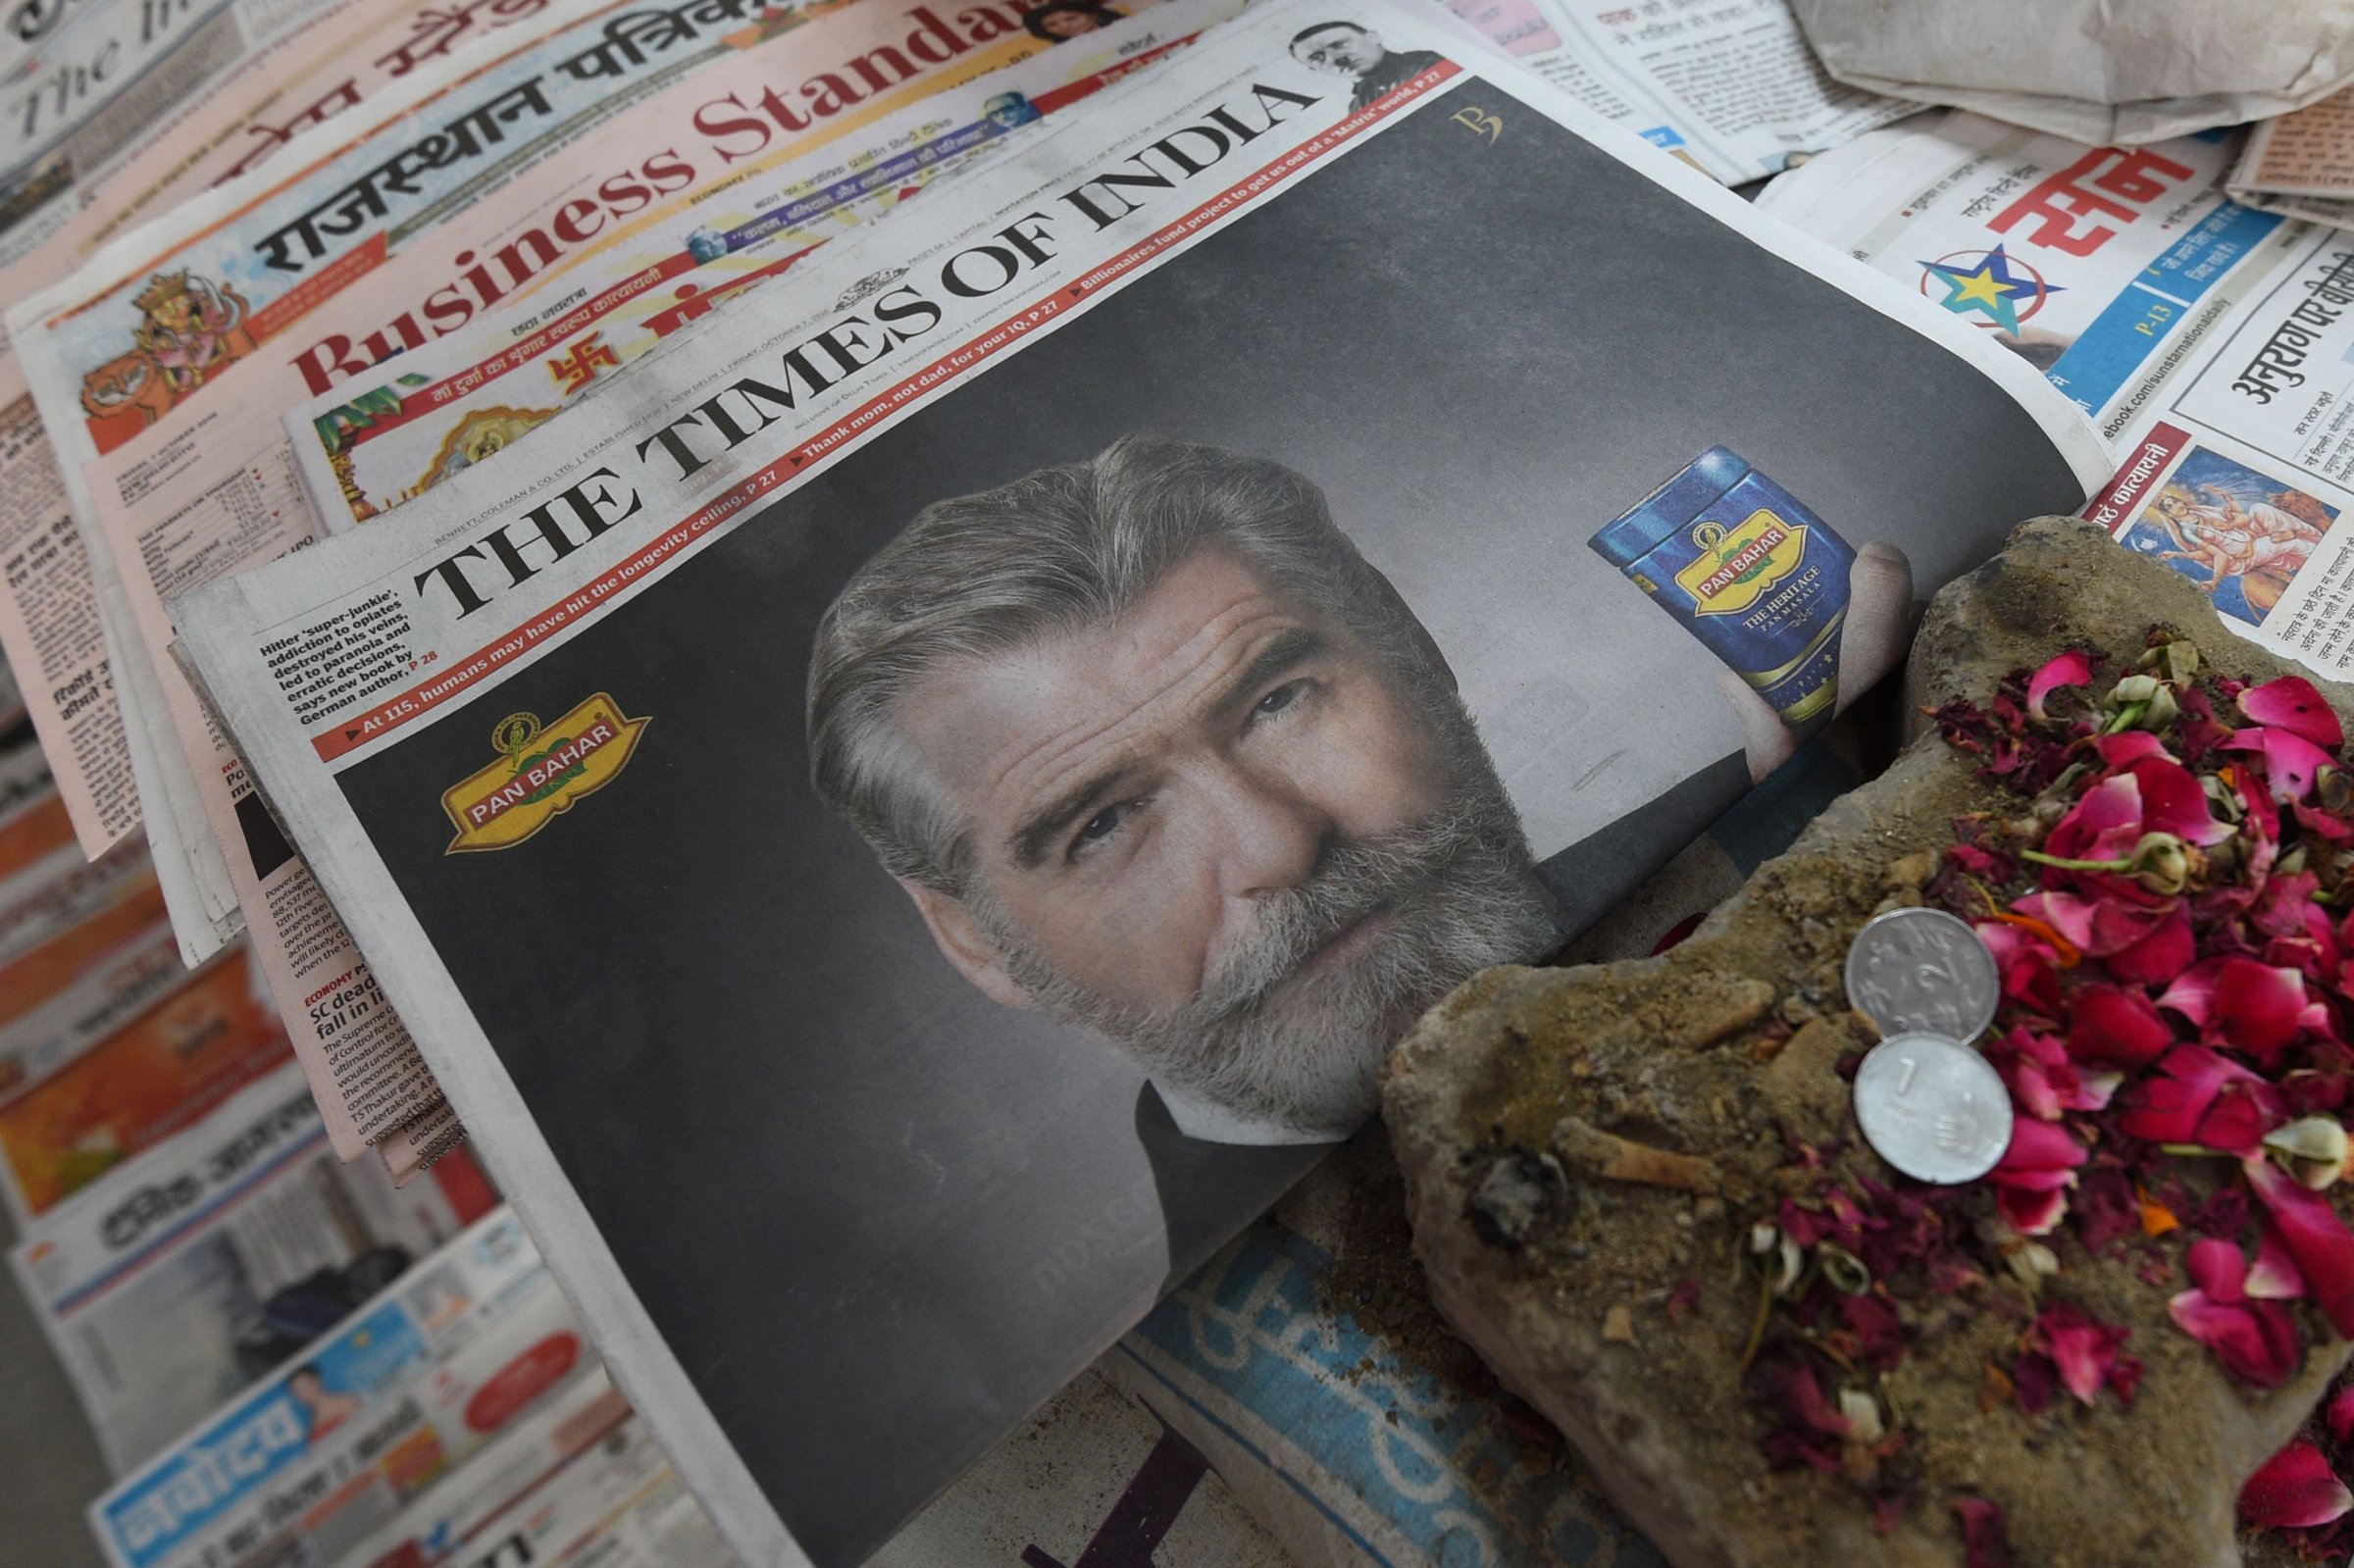 A newspaper with a front page advertisement of Pierce Brosnan endorsing an Indian mouth freshener, is seen on the streets of New Delhi on Oct. 7, 2016.